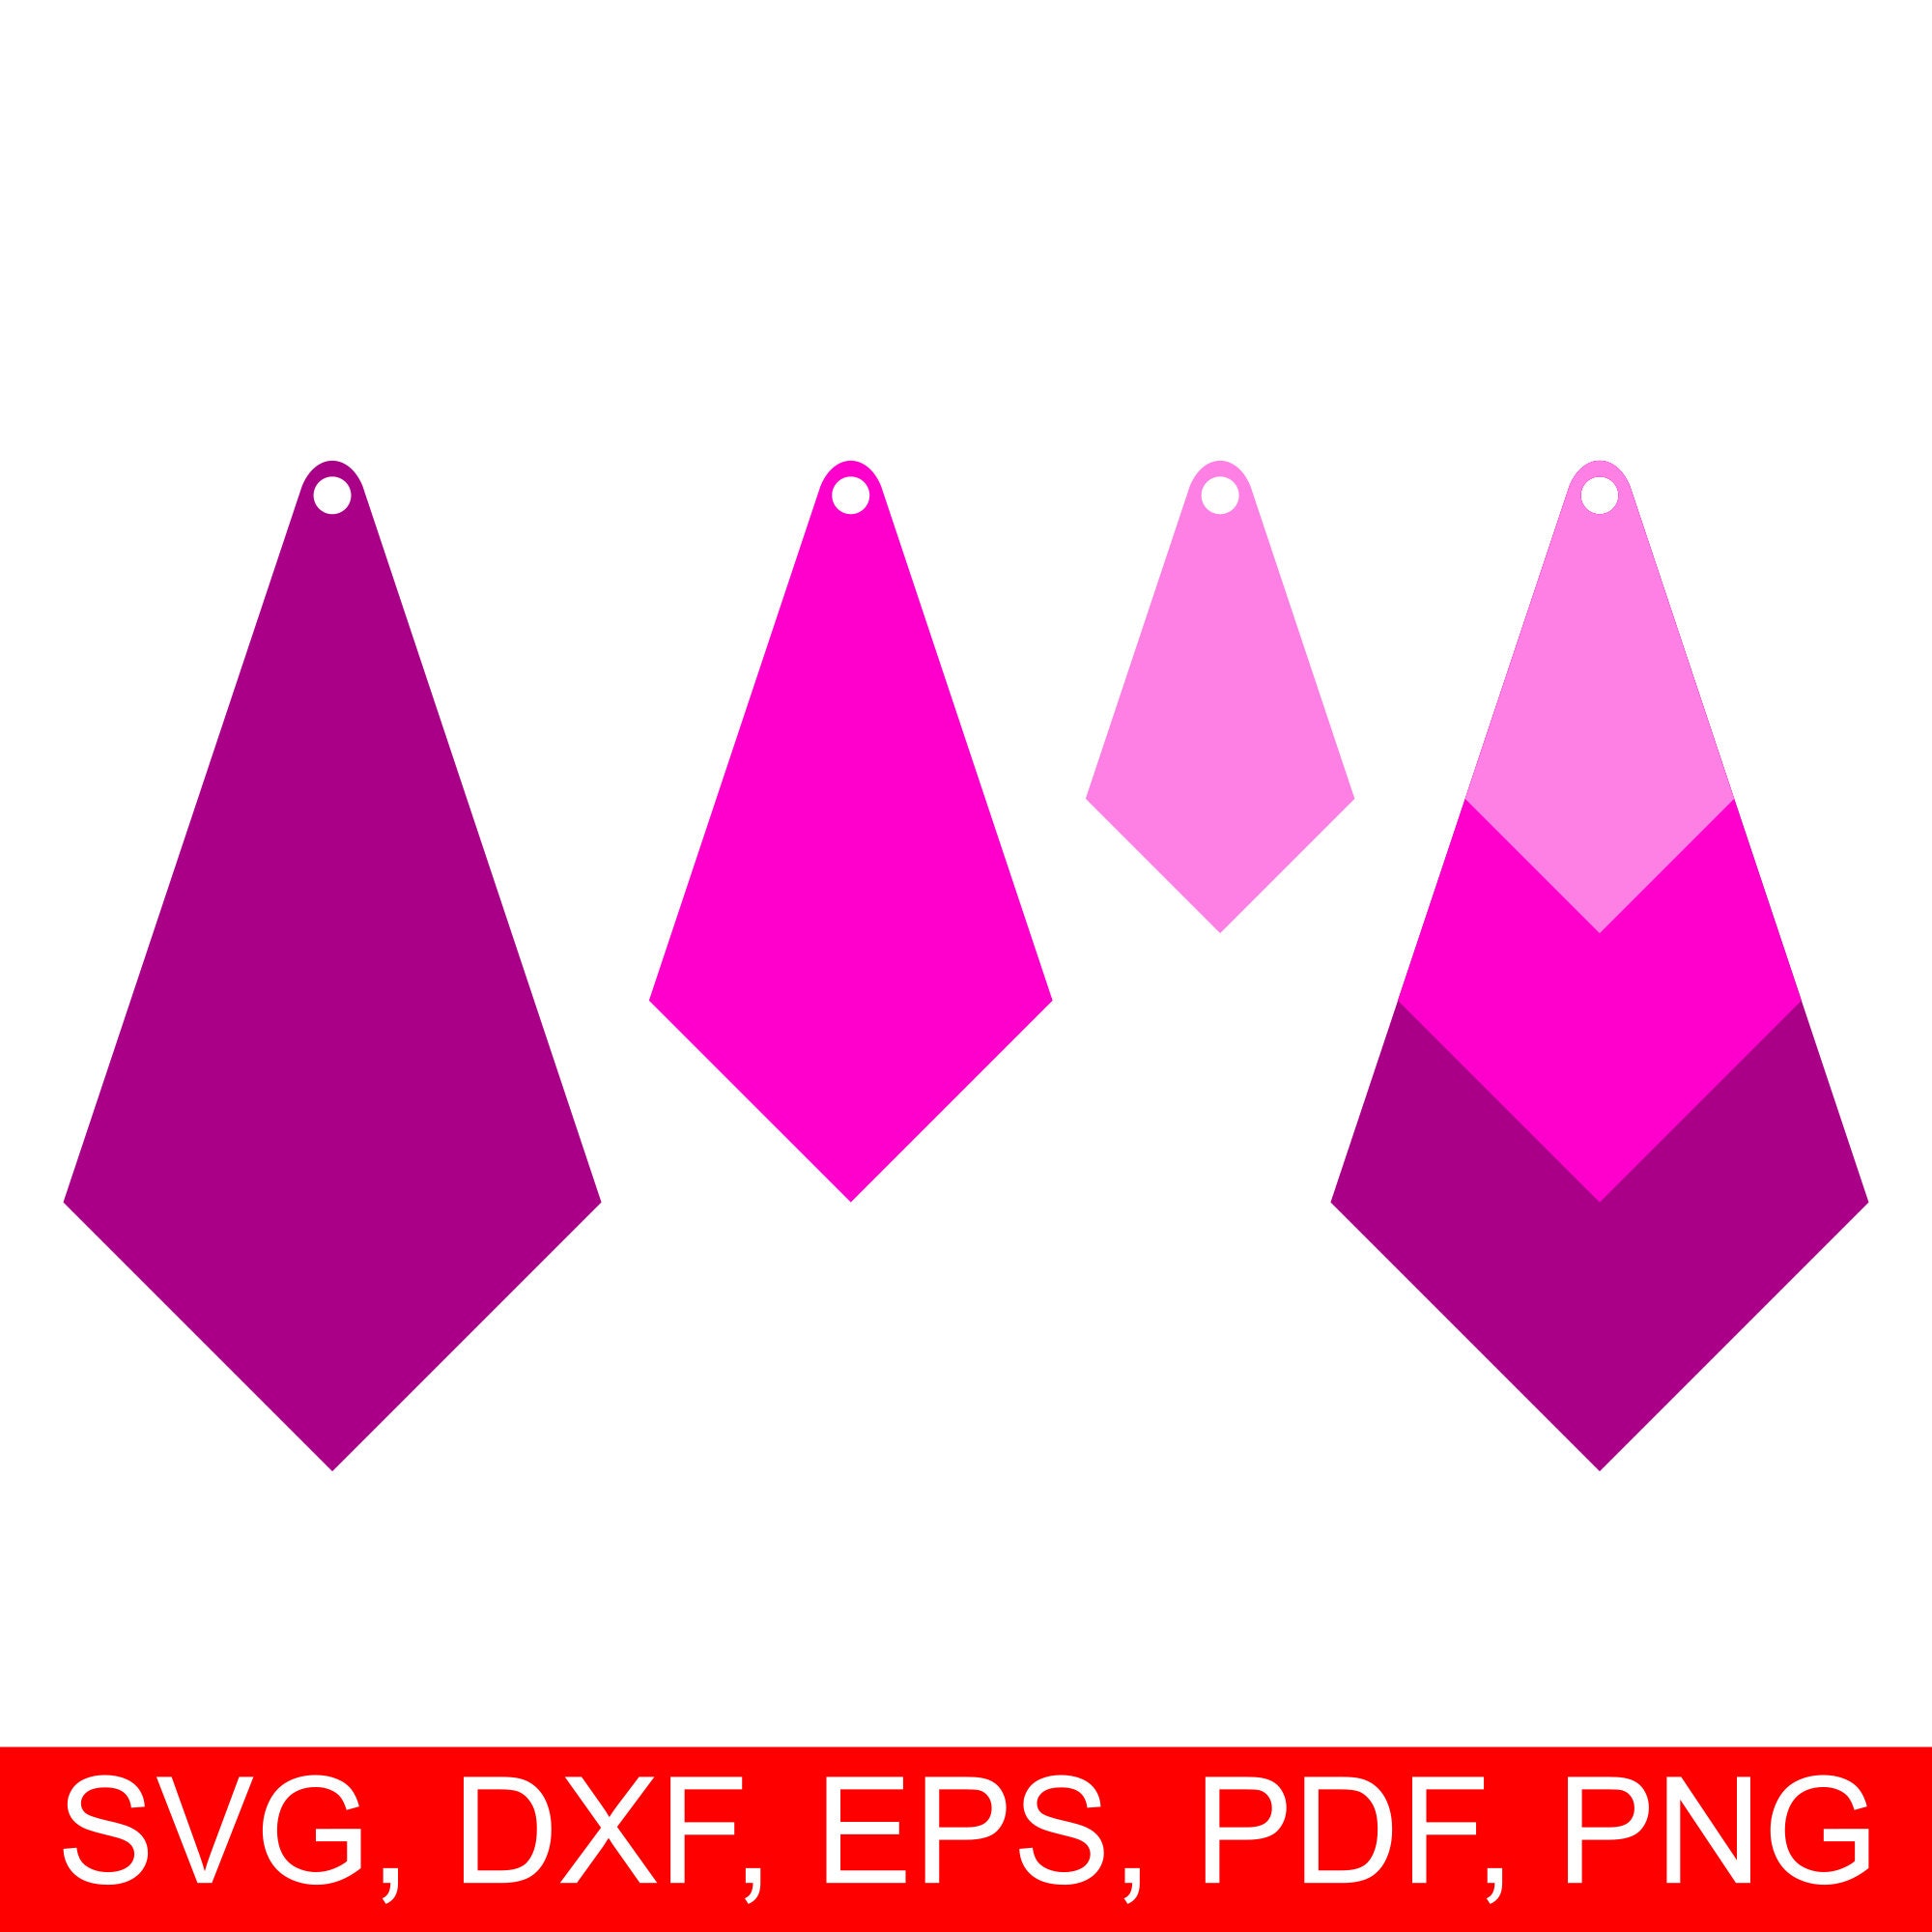 Download Stacked Earrings SVG Cut Files, DIY Earring templates ...